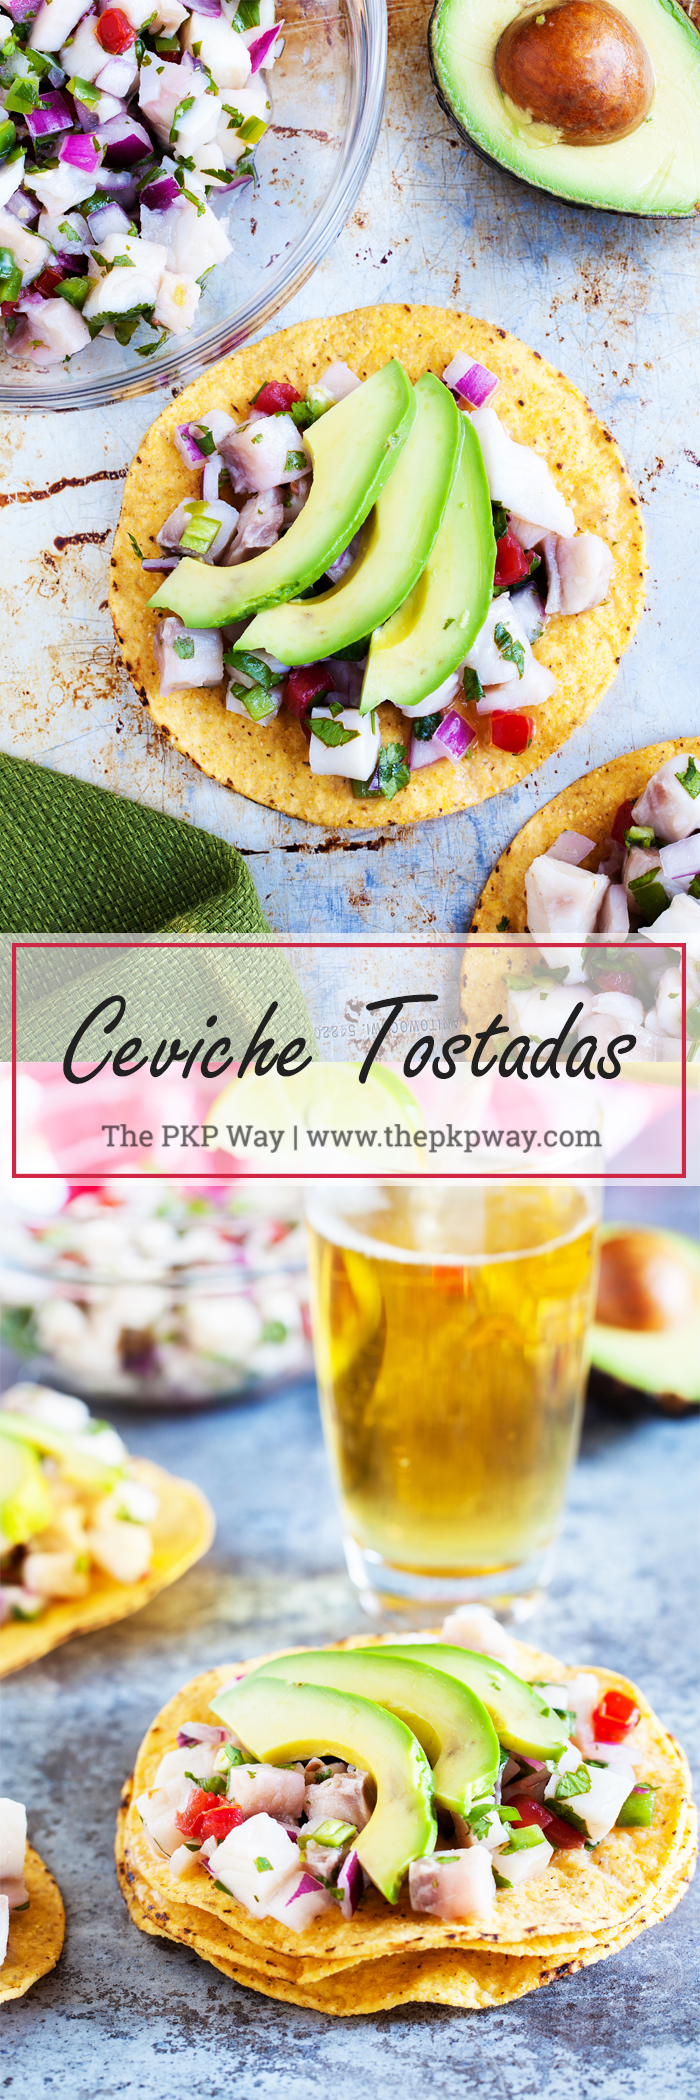 Transport yourself to Mexico with delicious and refreshing Ceviche Tostadas.